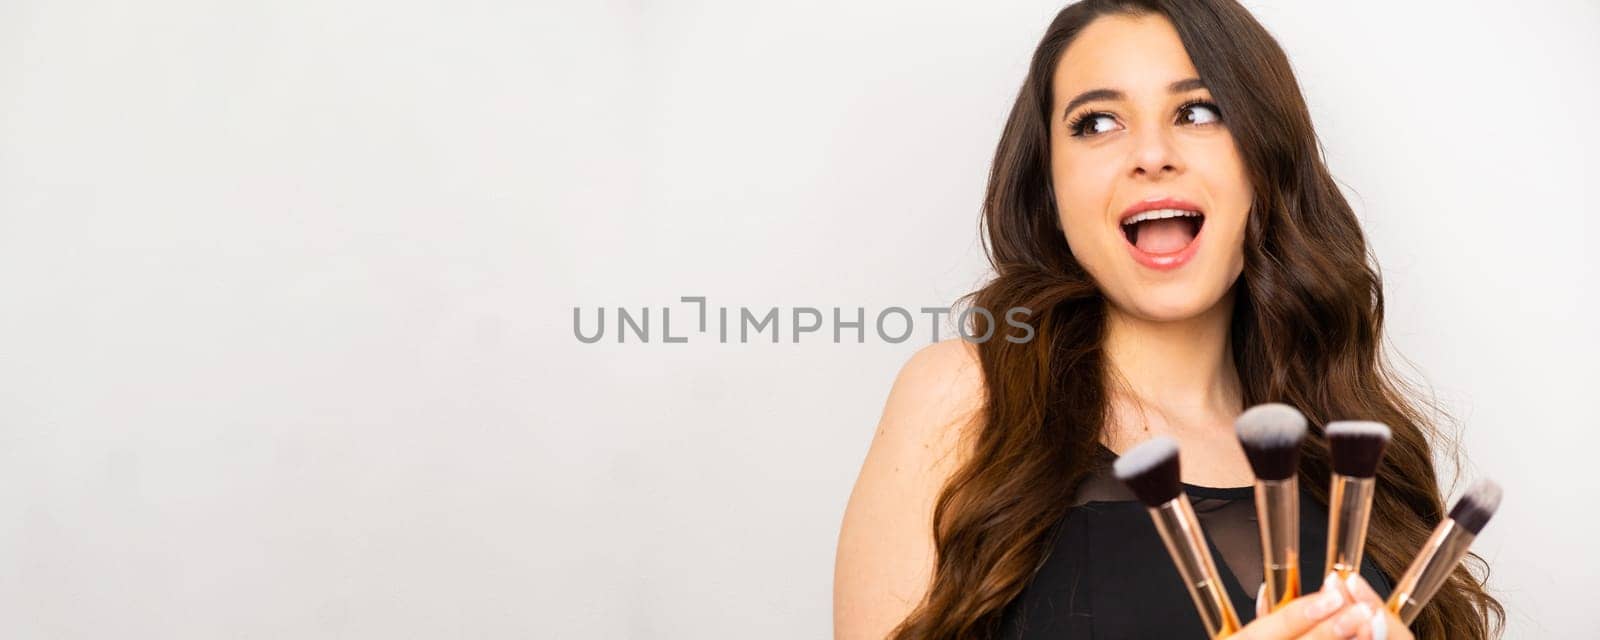 Beauty portrait of a joyful woman holding makeup brushes on a white background, banner